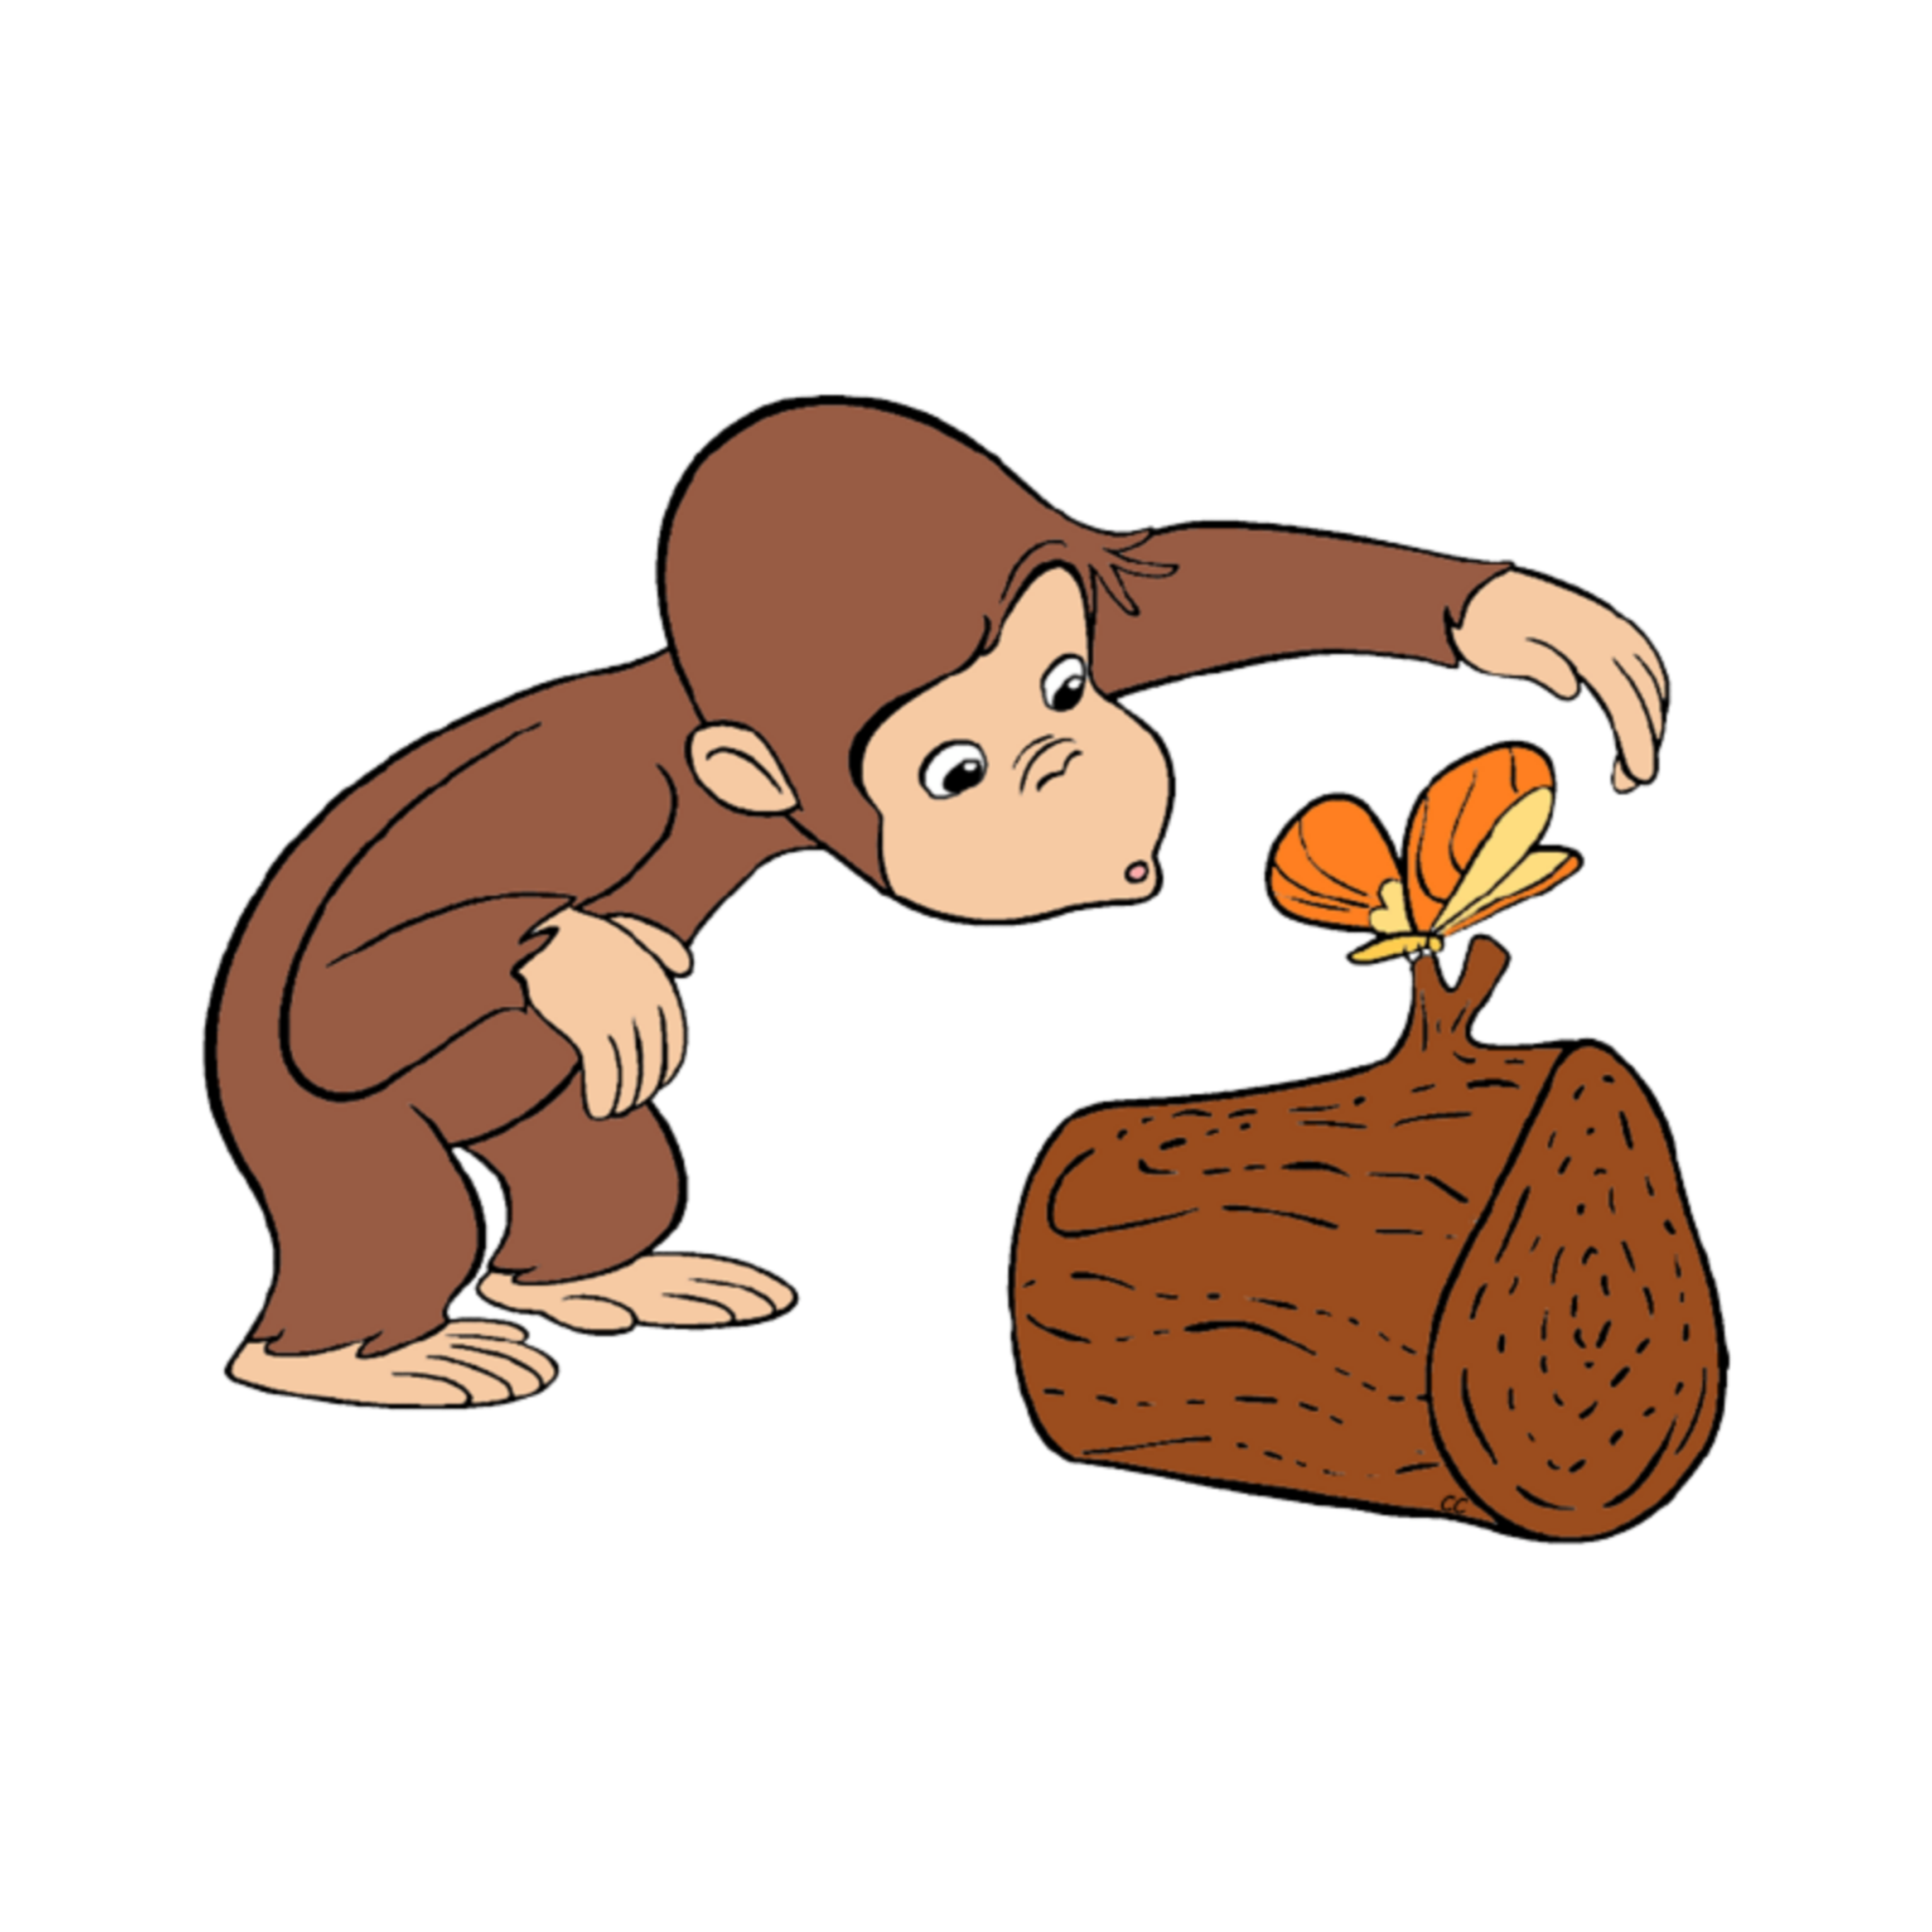 This visual is about curiousgeorge freetoedit #curiousgeorge.